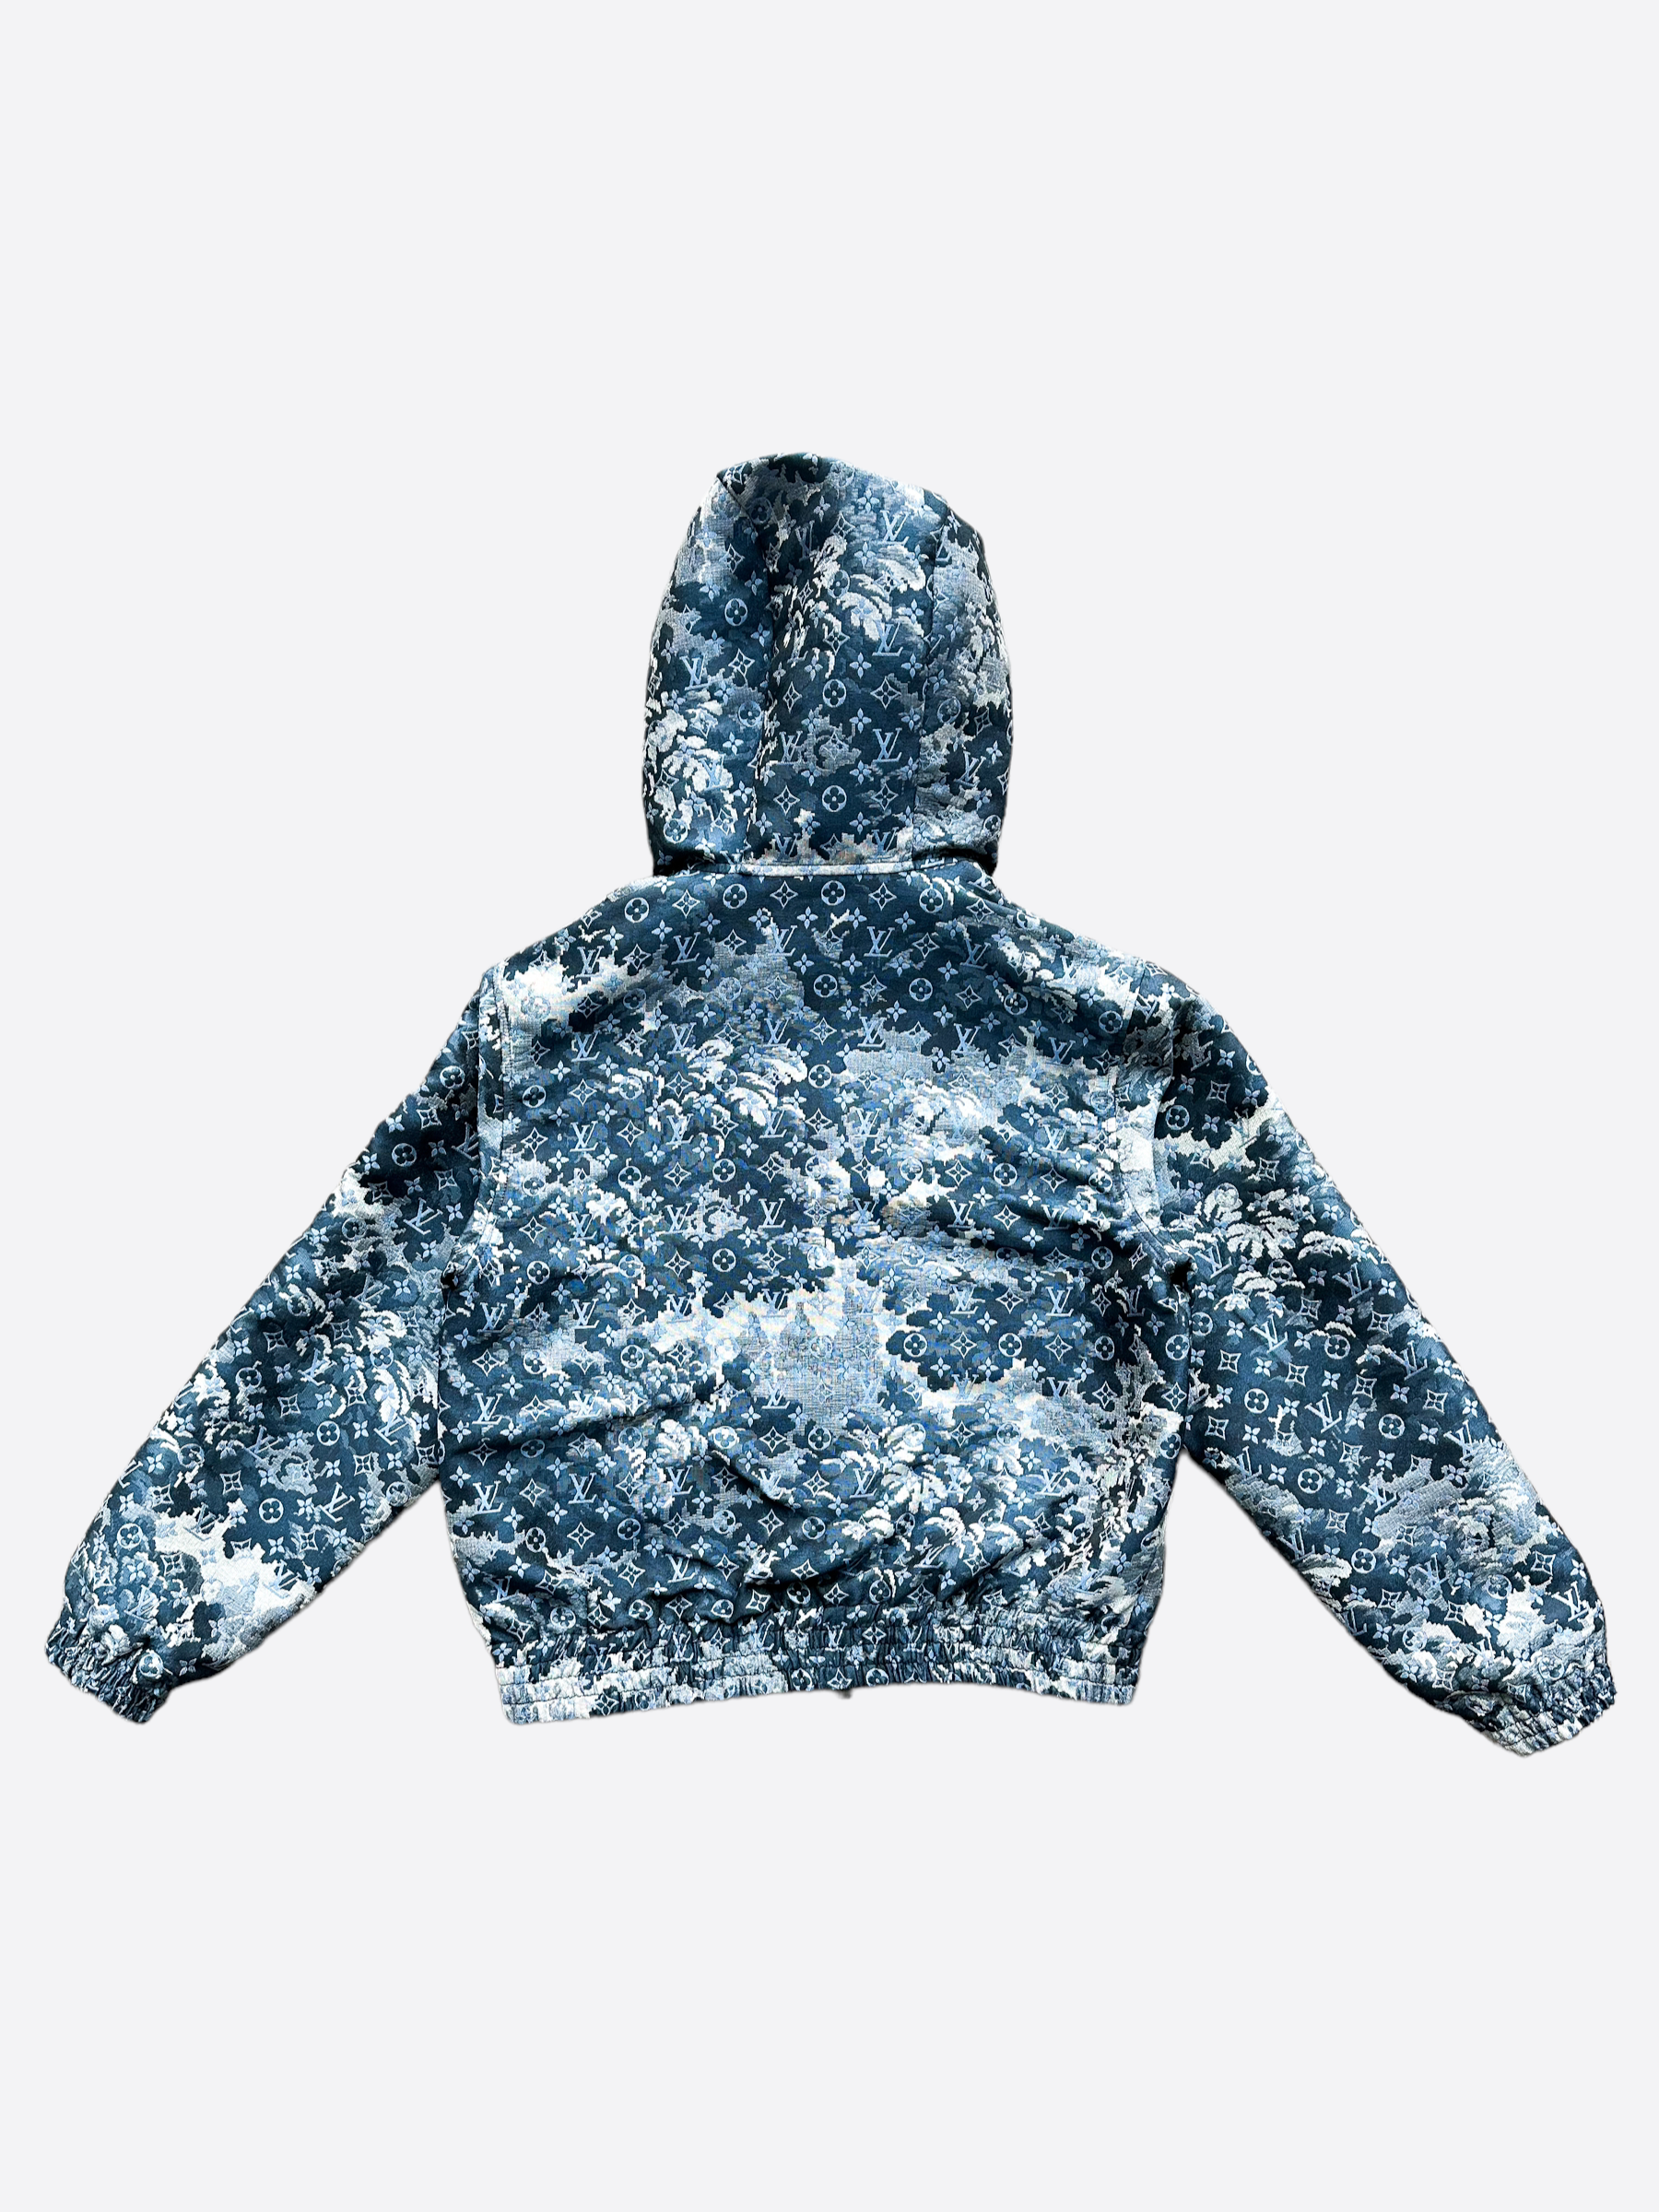 Louis Vuitton Monogram Tapestry Windbreaker // All sizes available